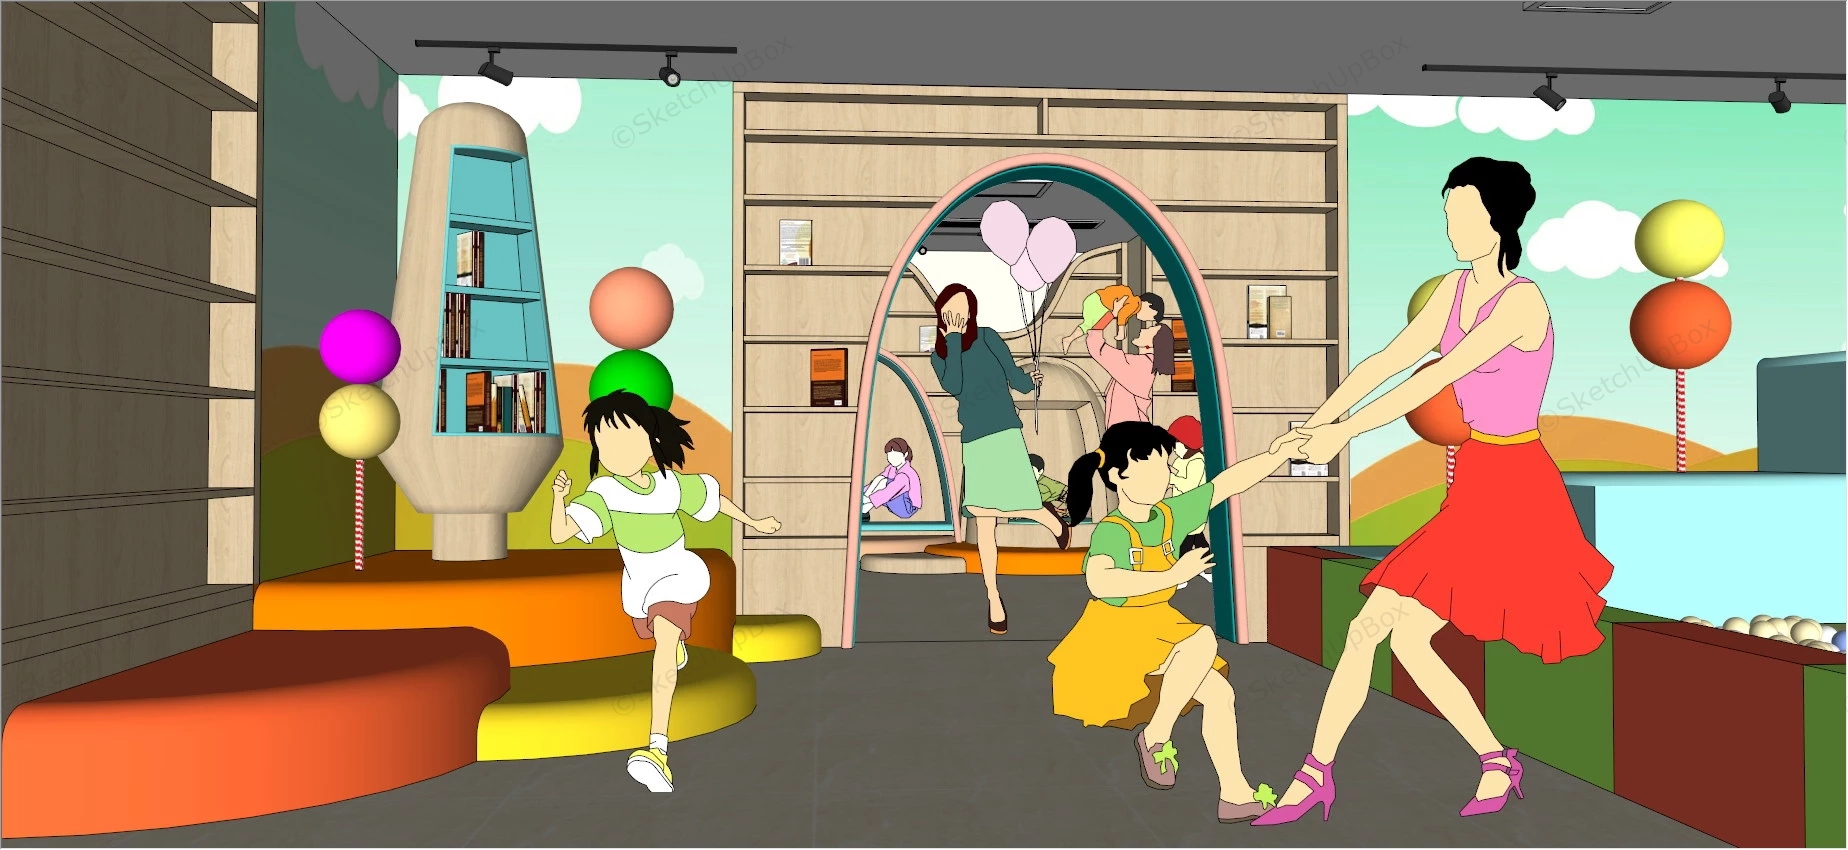 Indoor Playground For Kids sketchup model preview - SketchupBox